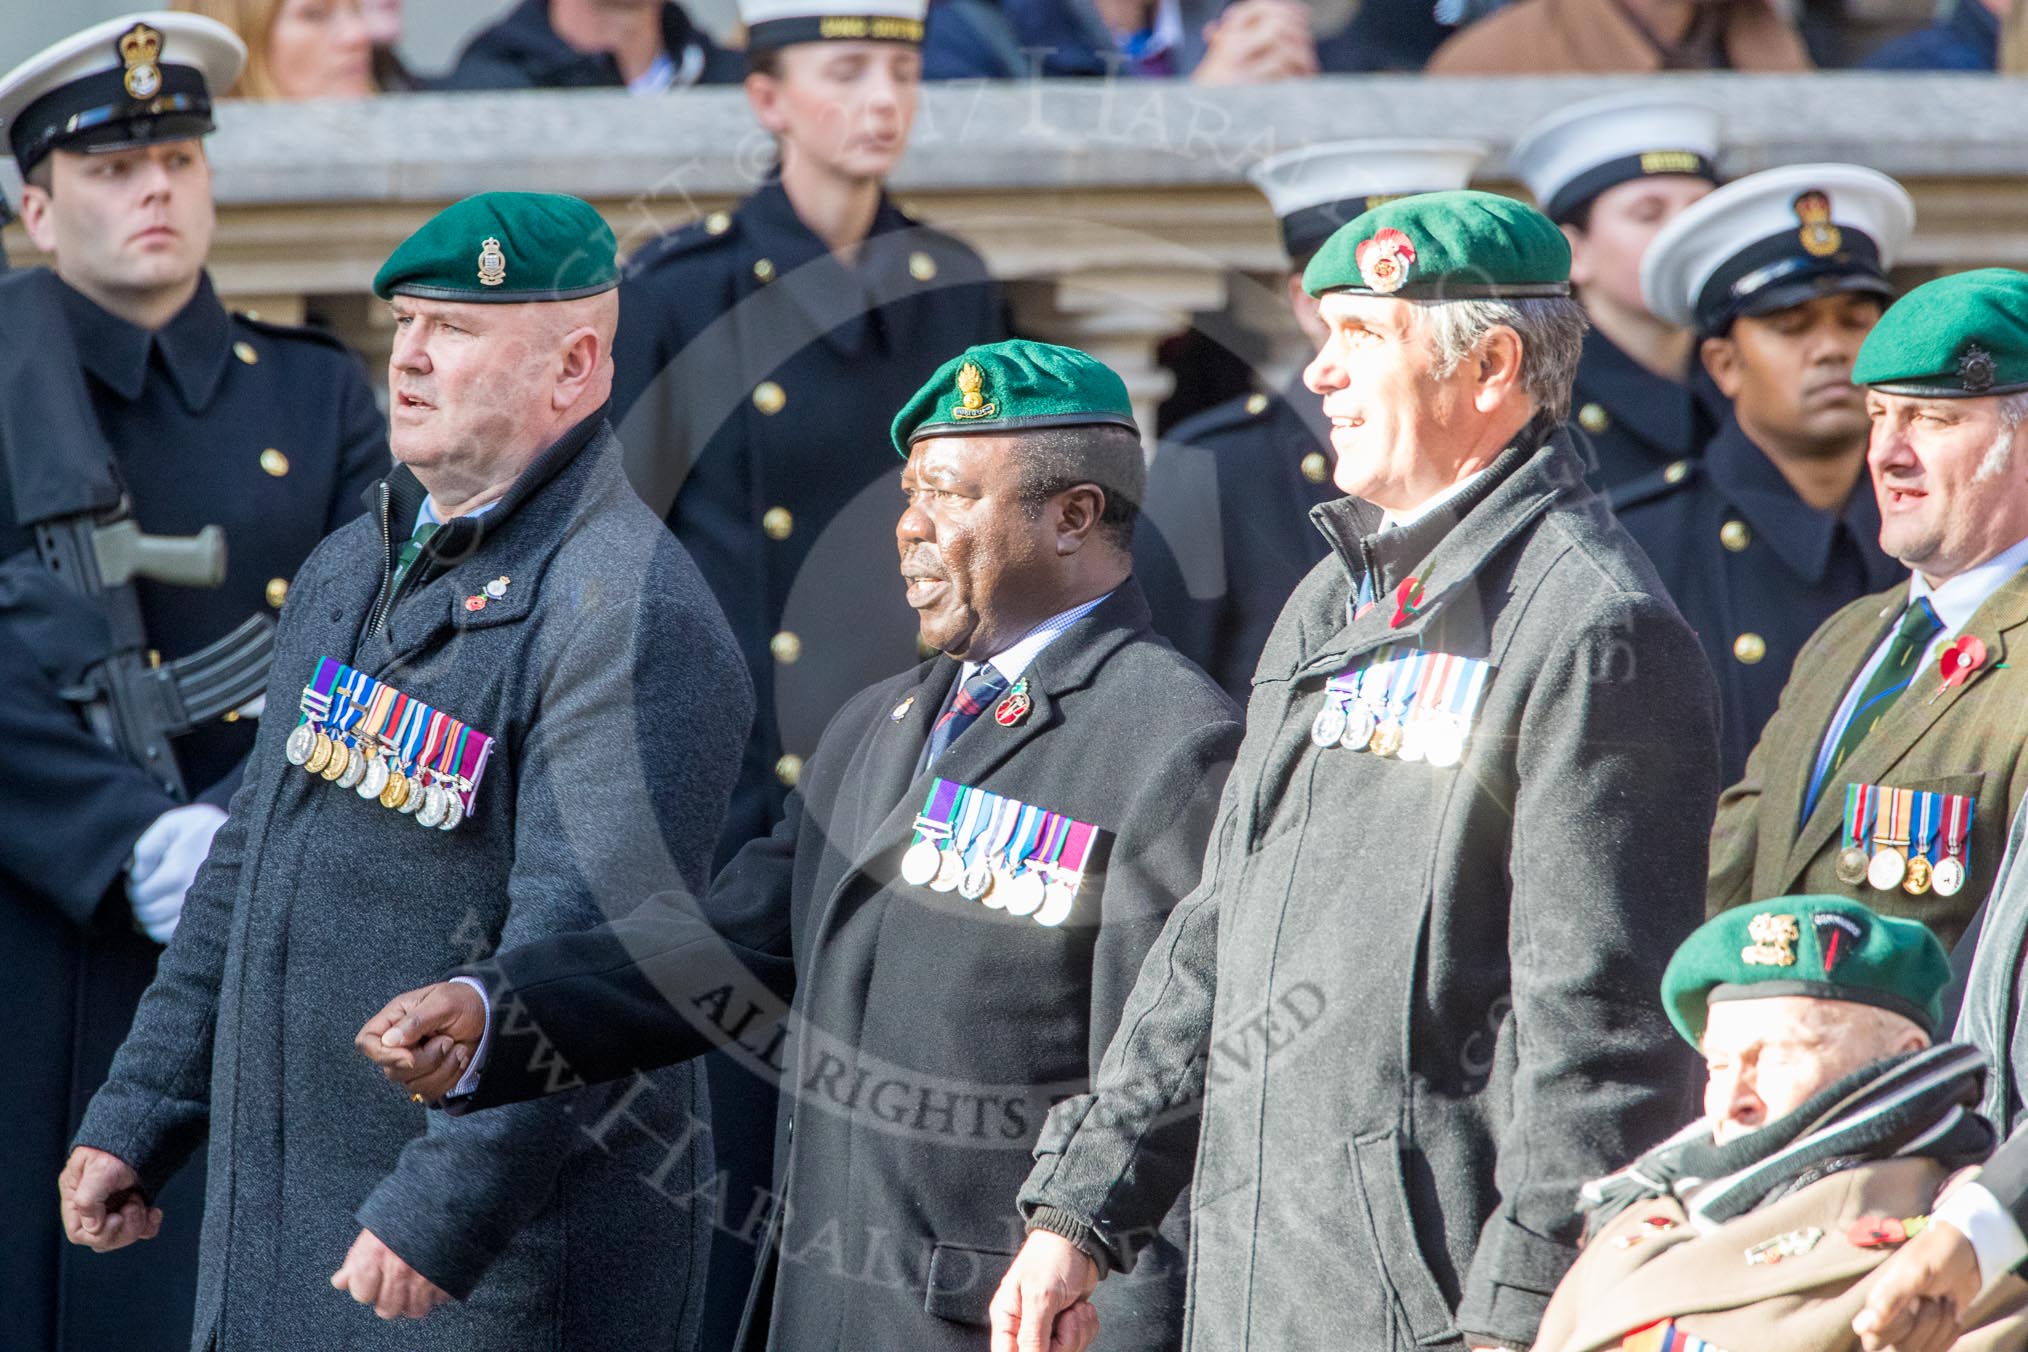 Commando Veterans Association  (Group D12, 42 members) during the Royal British Legion March Past on Remembrance Sunday at the Cenotaph, Whitehall, Westminster, London, 11 November 2018, 12:22.